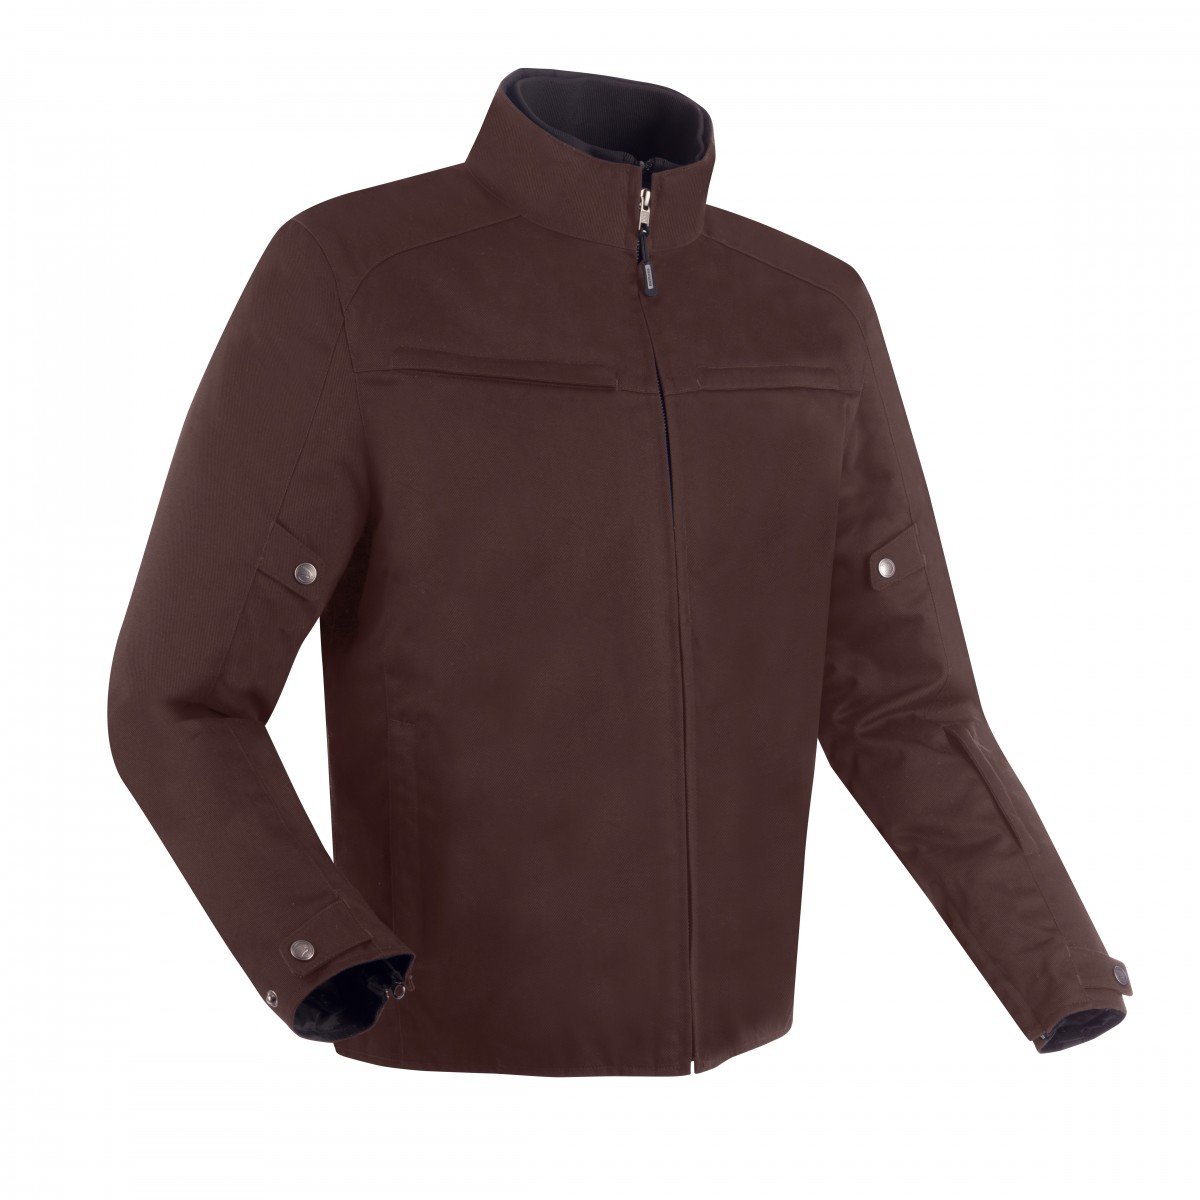 Image of Bering Cruiser Jacket Brown Size S ID 3660815169278